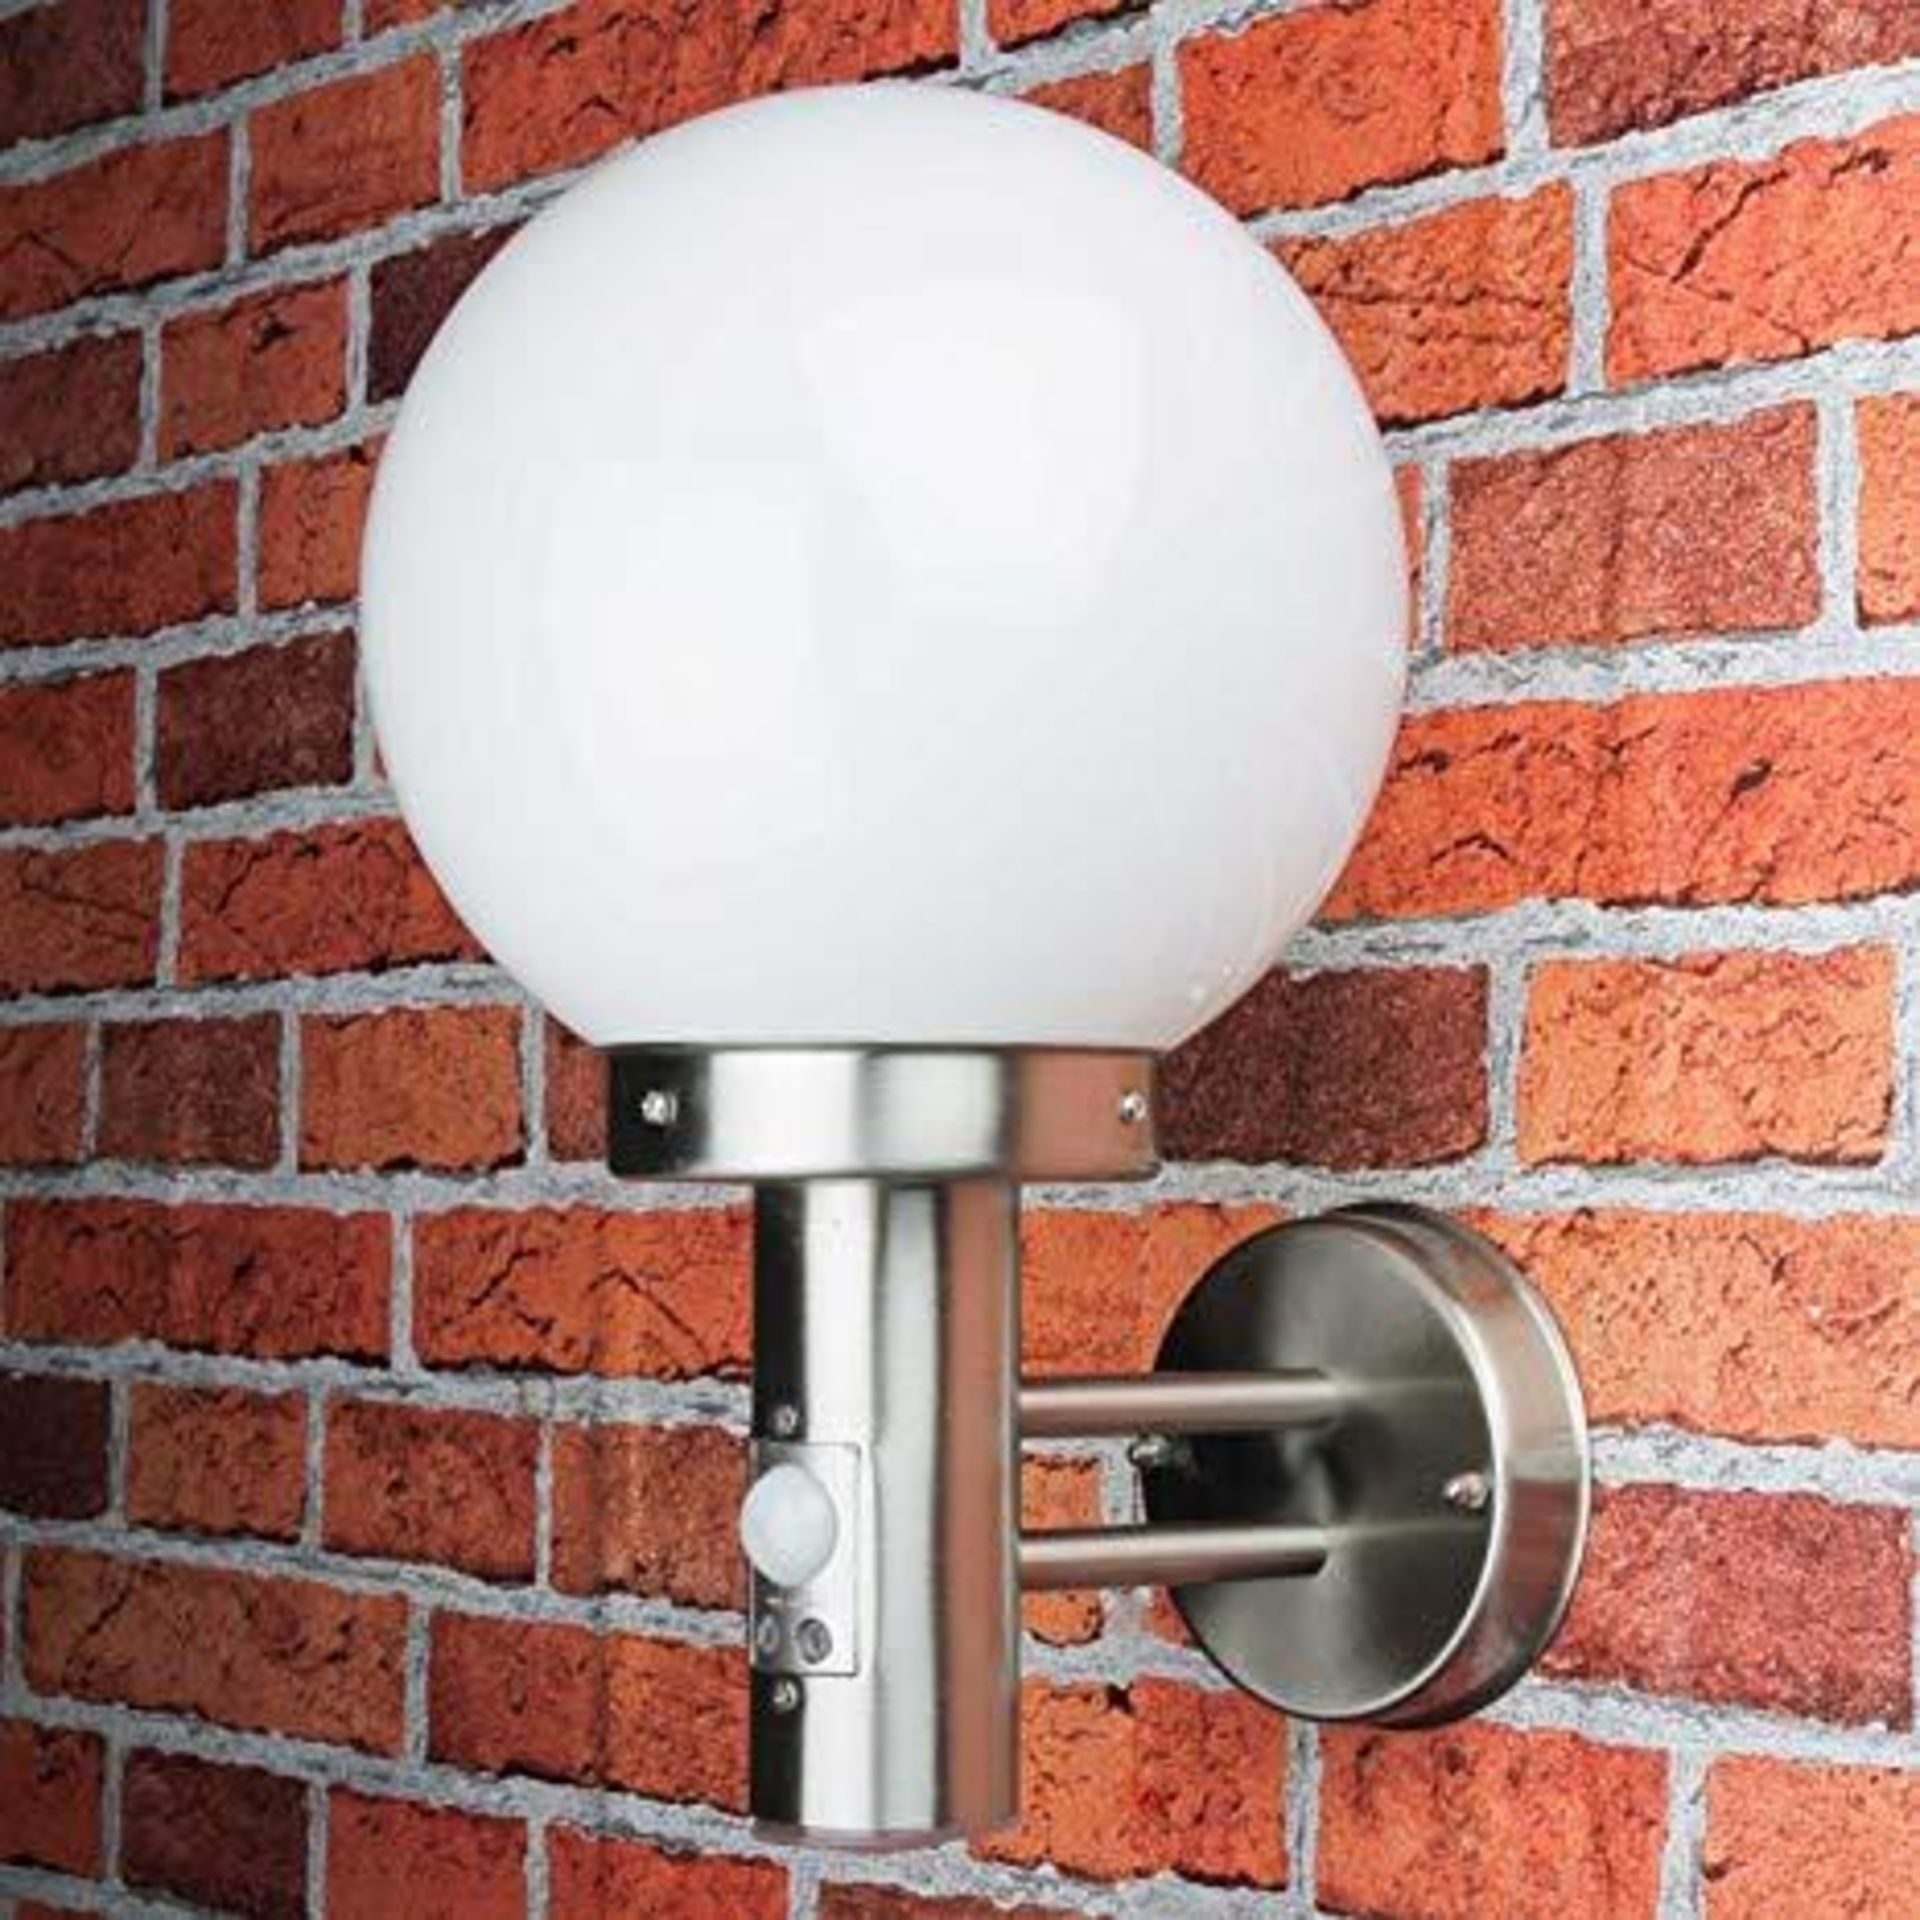 4 x Globe Outdoor Wall Light With PIR Motion Sensor - Stainless Steel With Polycarbonate Shade - IP4 - Image 5 of 6